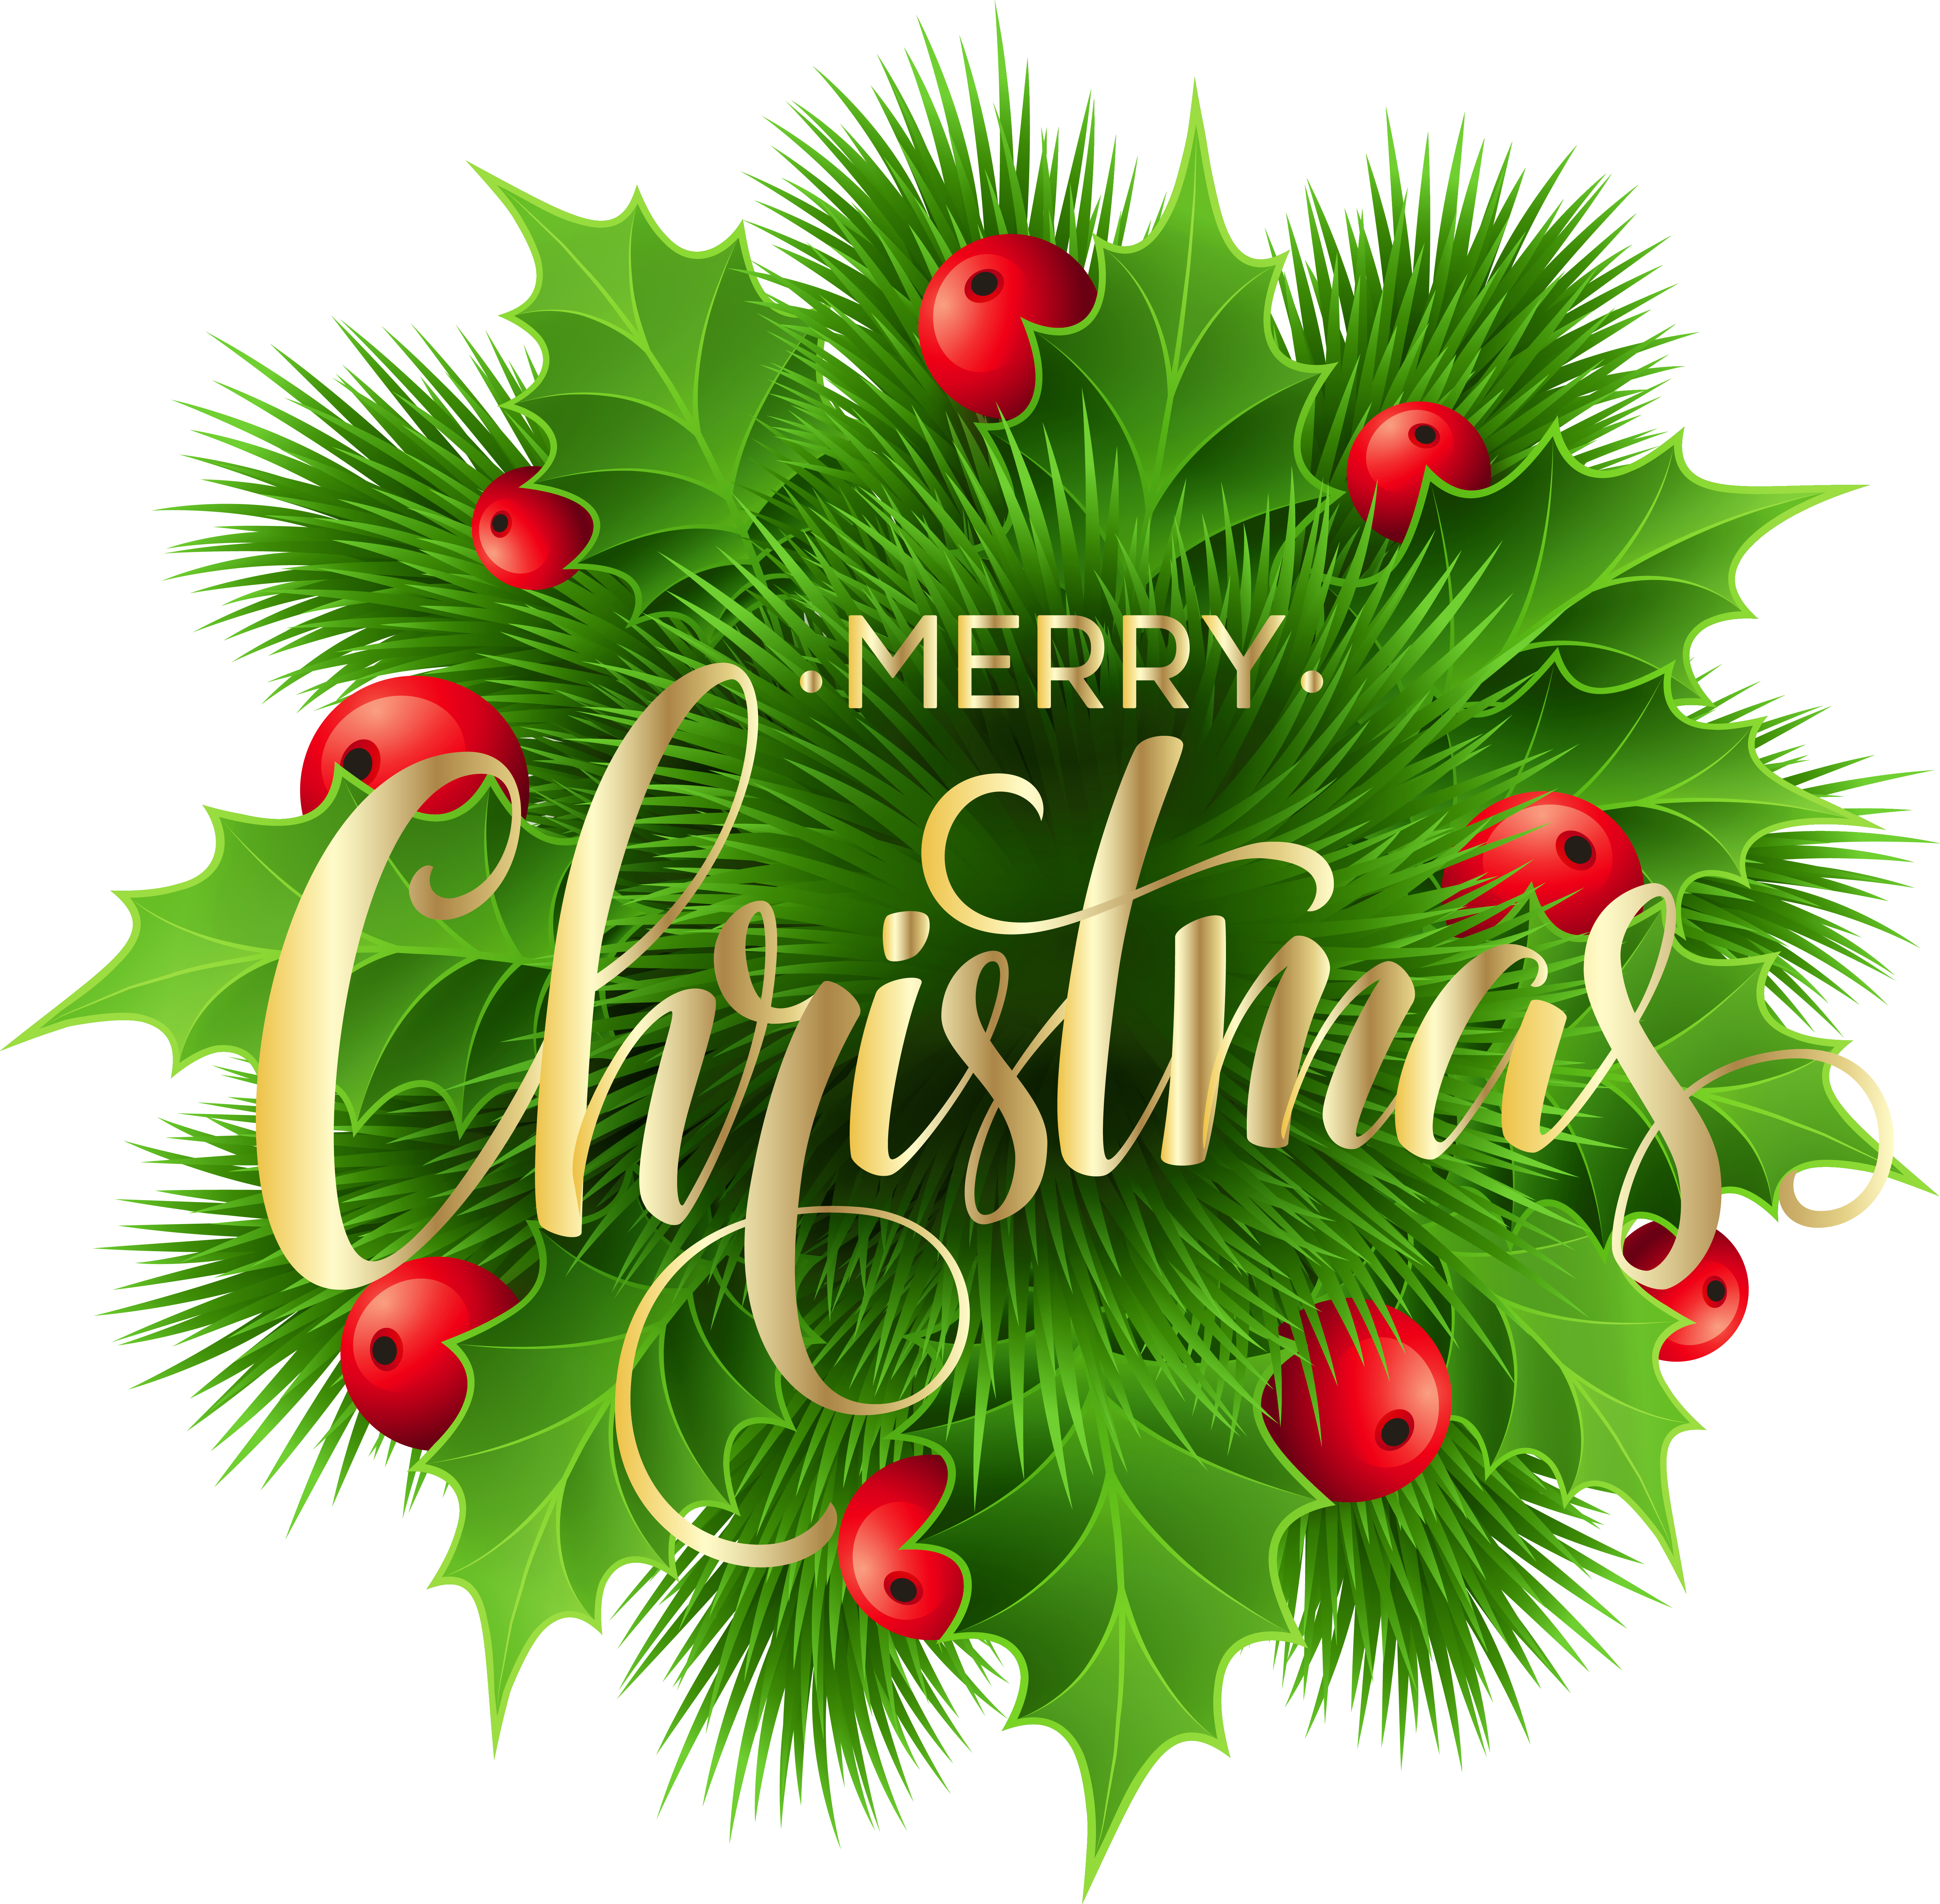 Merry Christmas Pine Decoration PNG Clip Art Image Quality Image And Transparent PNG Free Clipart